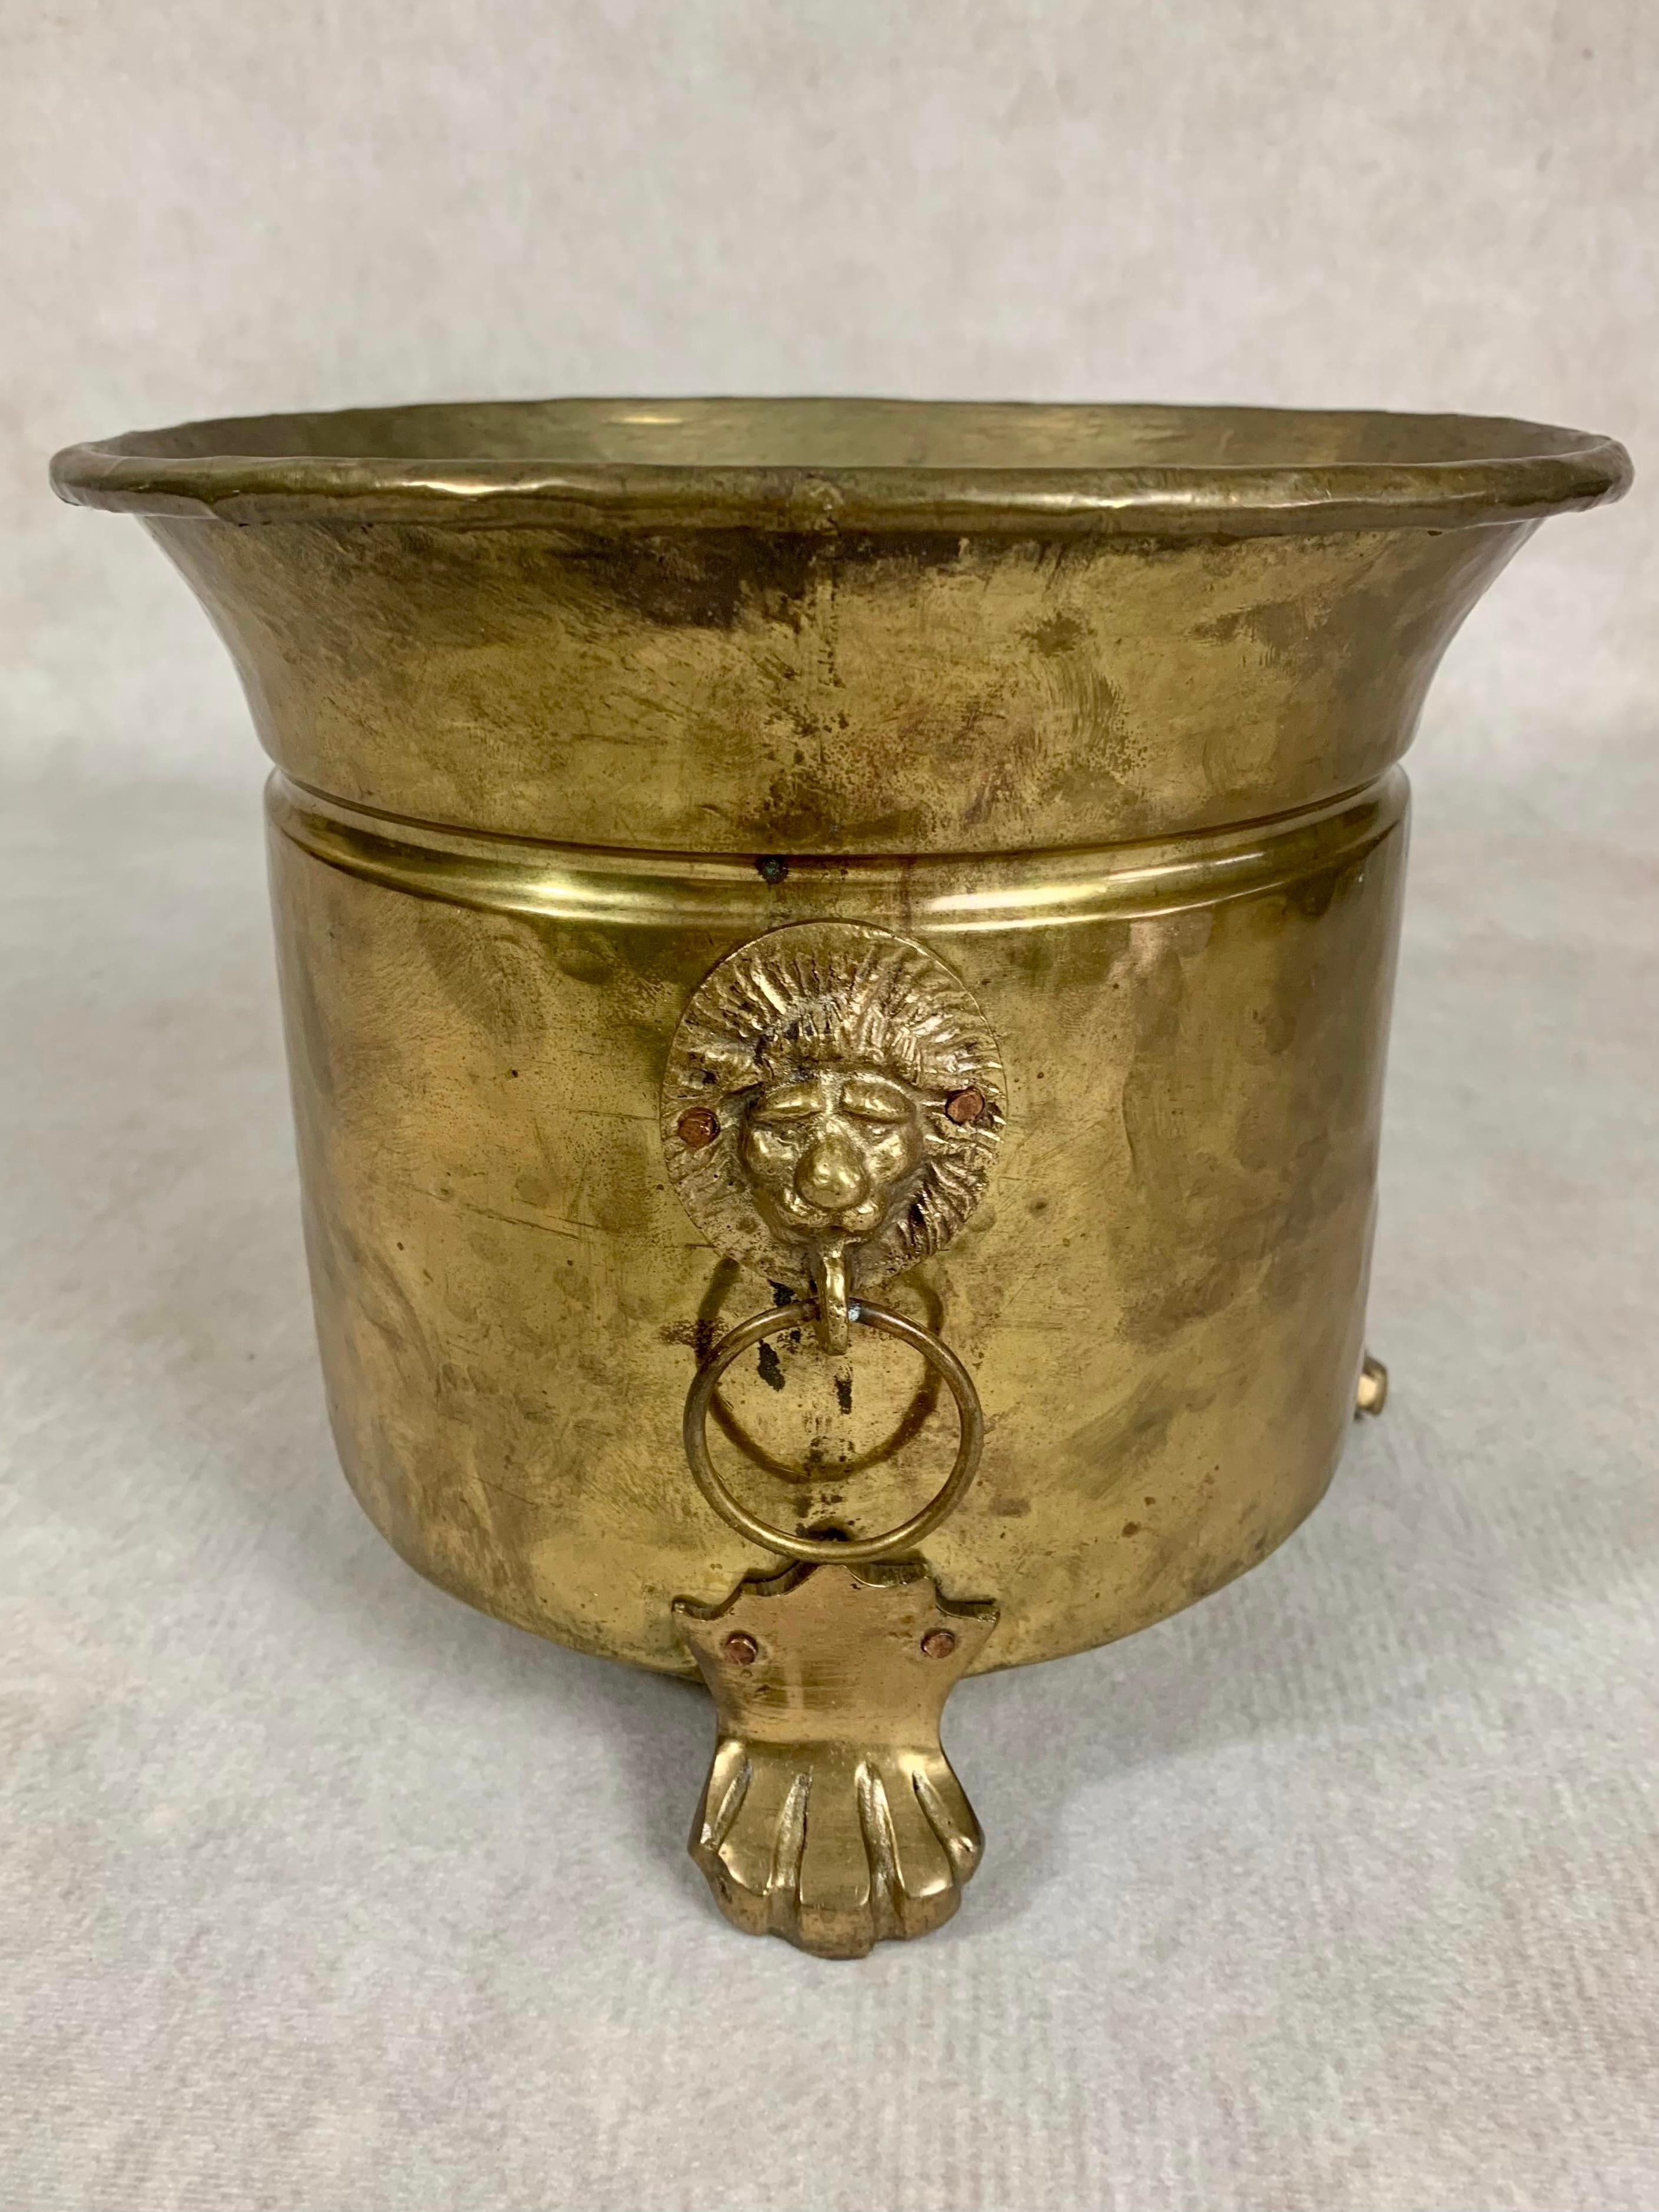 Late 19th century hammered brass jardiniere originally from France featuring lion head handles with copper rivets, a rolled rim, and three paw feet.

Normal wear commensurate with age.  Please examine photos carefully for details.